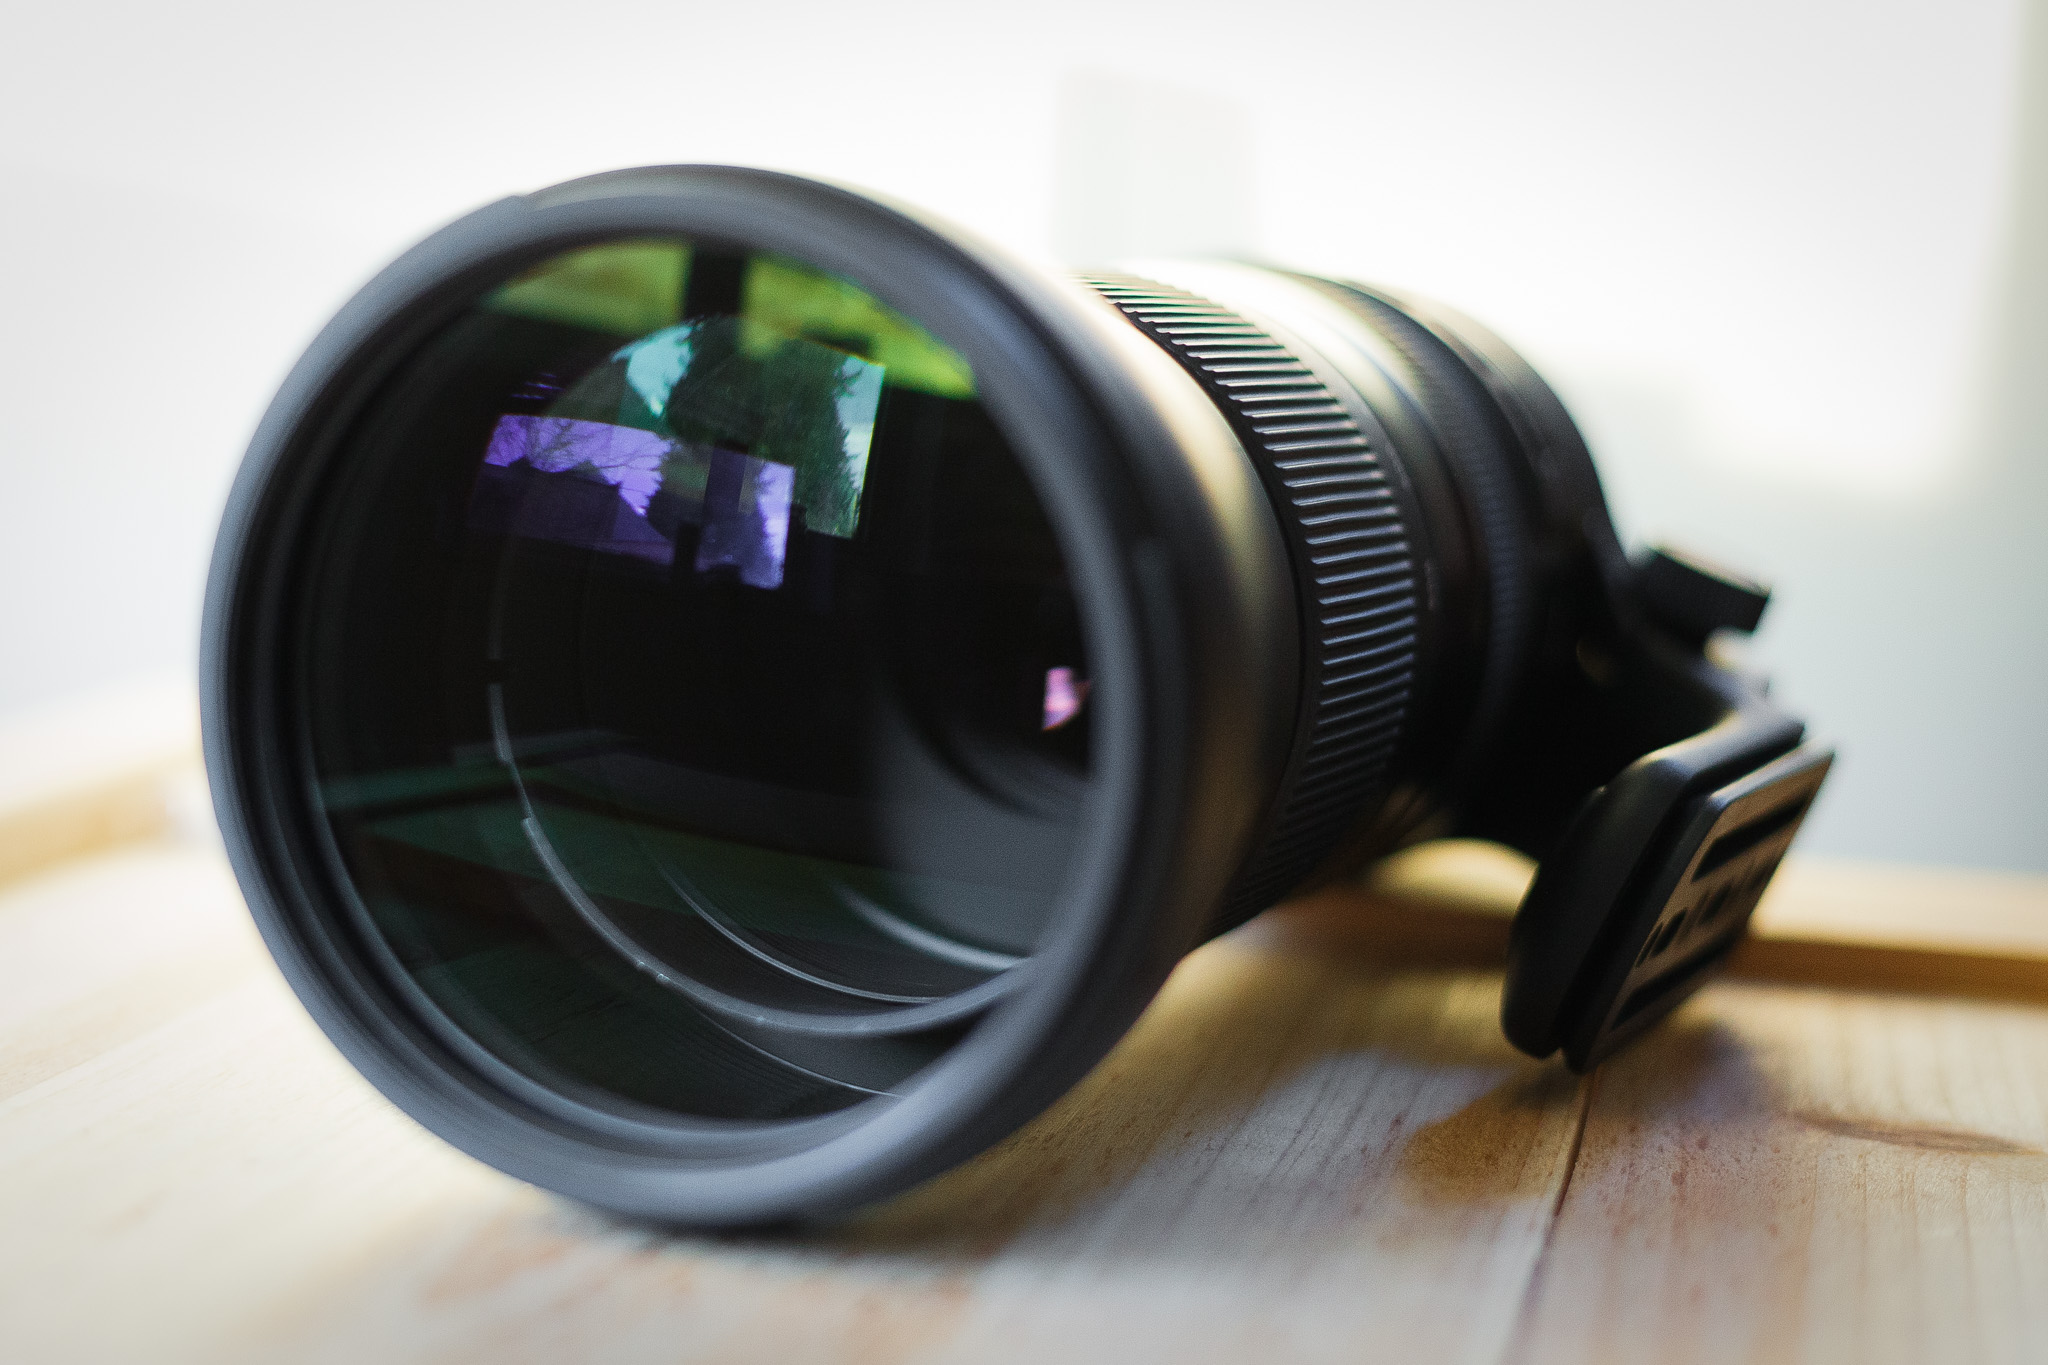 Review | Hands On With The New Tamron 150-600mm F/5-6.3 Di VC USD G2